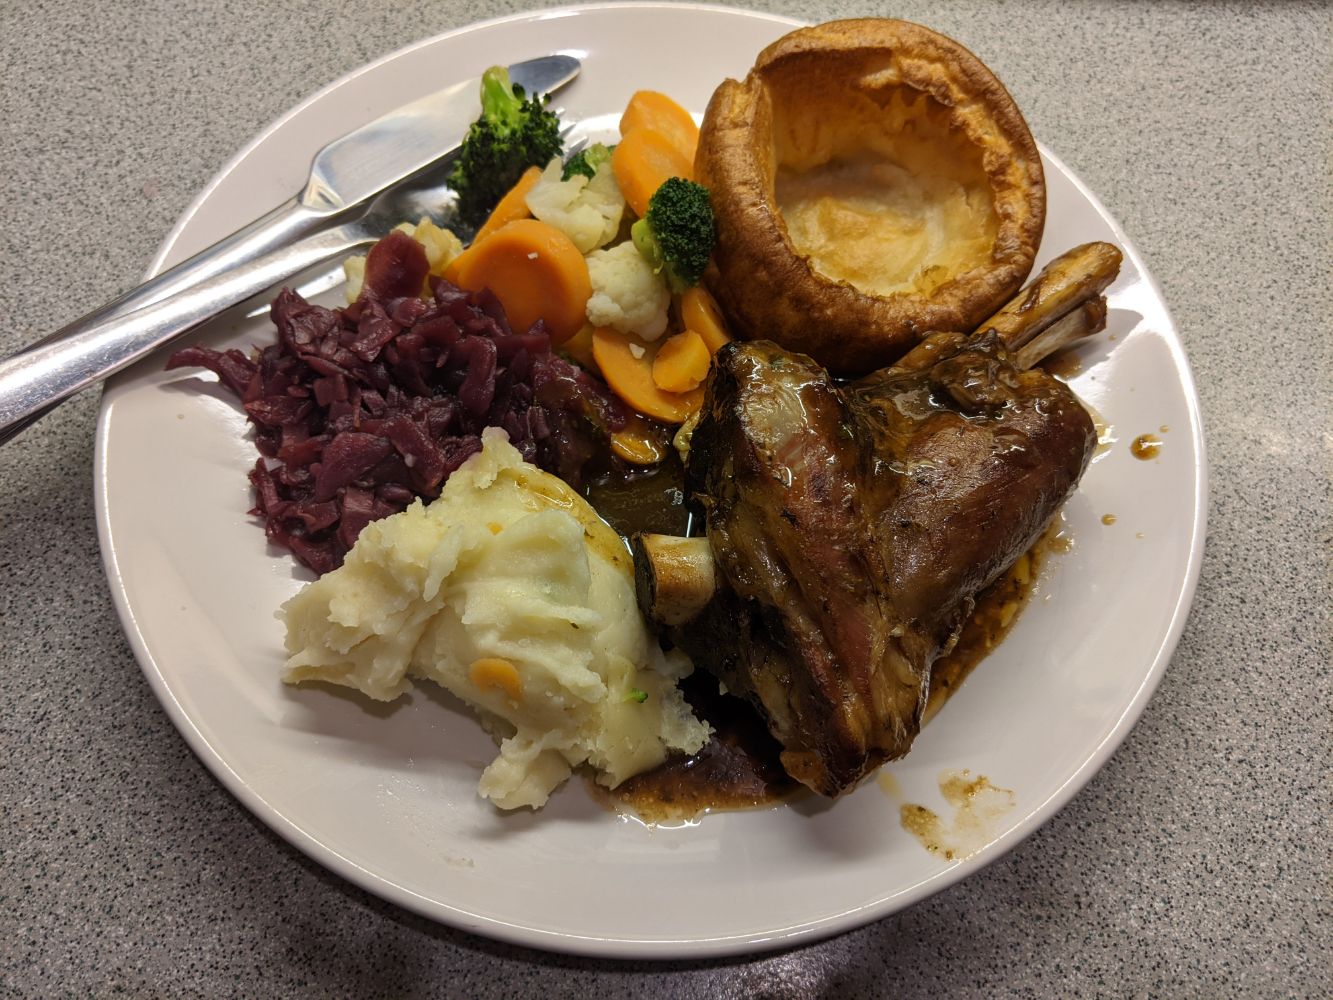 A plate with a lamb shank, with cheddar mashed potatoes, red cabbage, broccoli, cauliflower, carrots, a Yorkshire pudding, and mint gravy